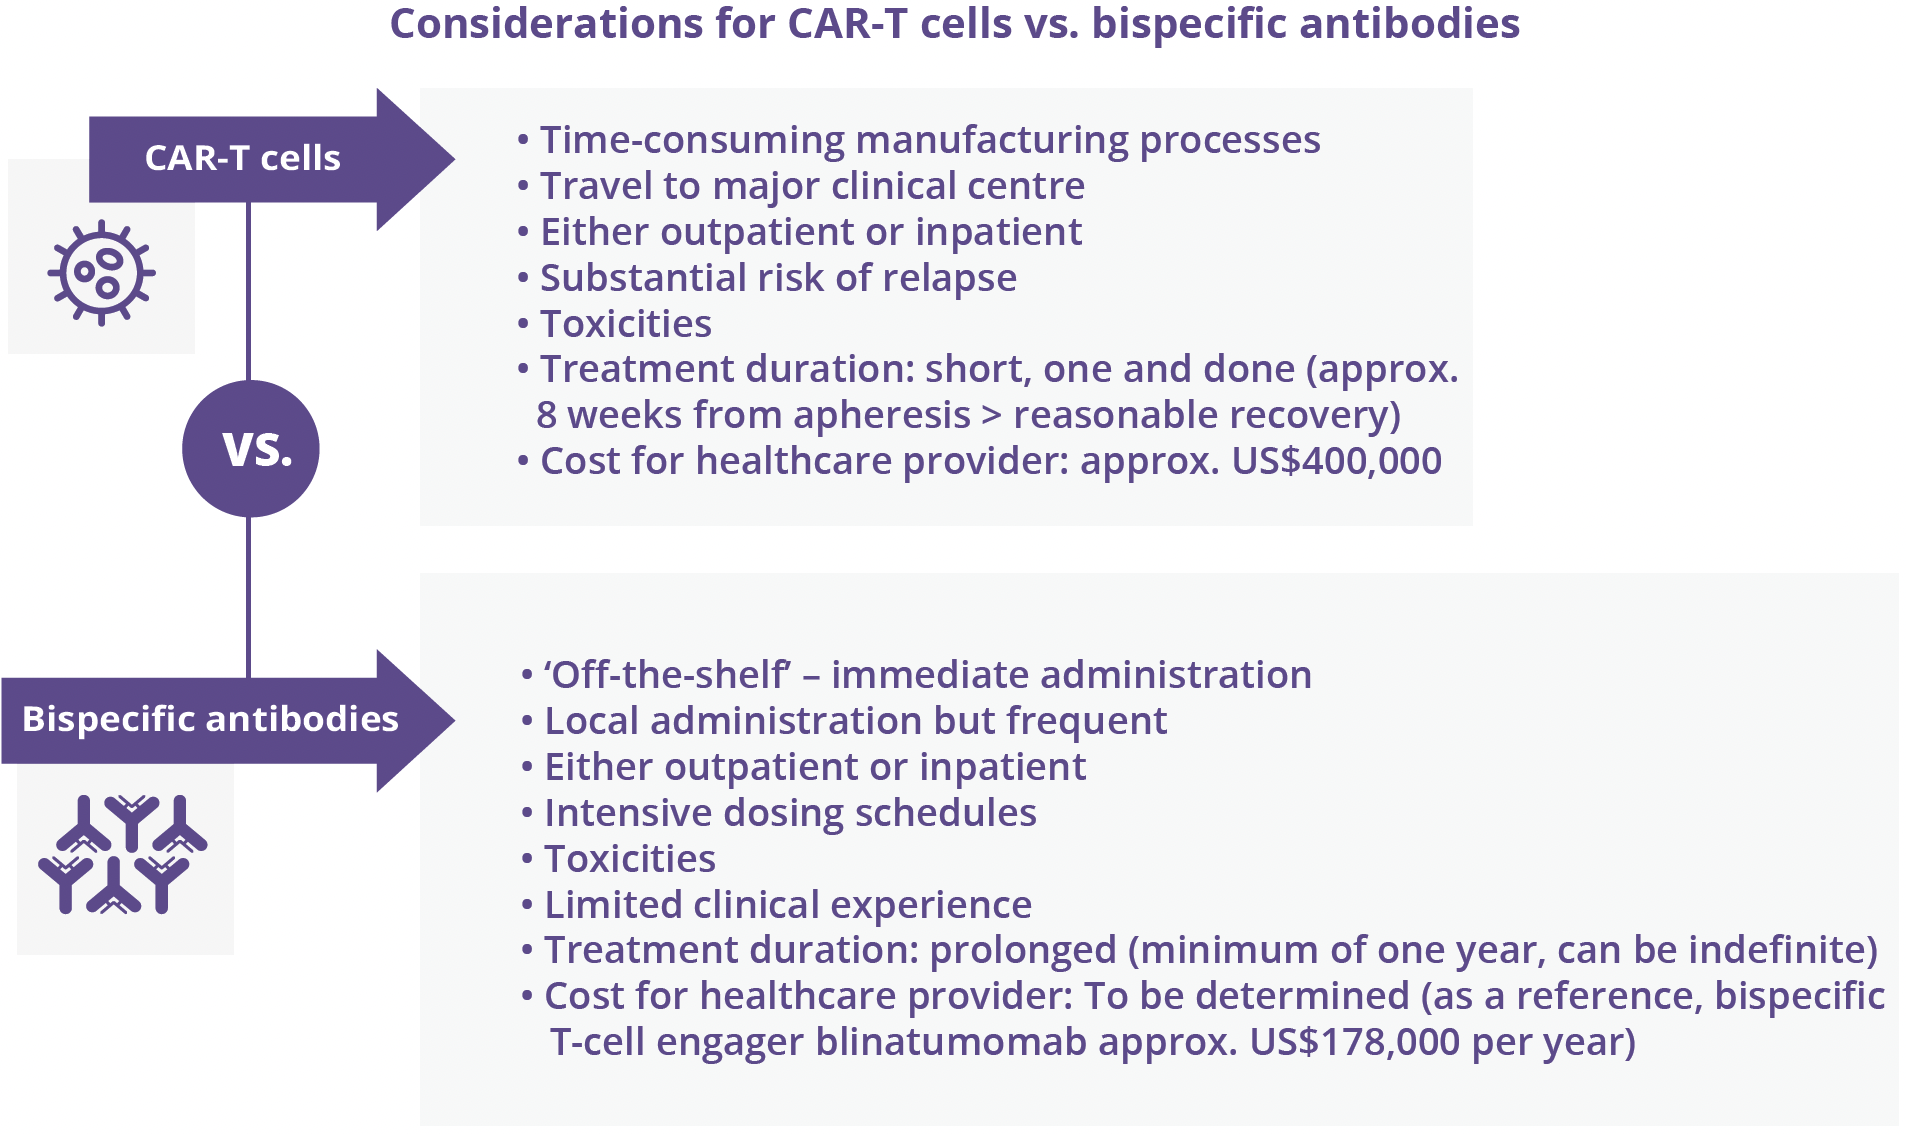 Considerations for CAR-T cells vs. bispecific antibodies